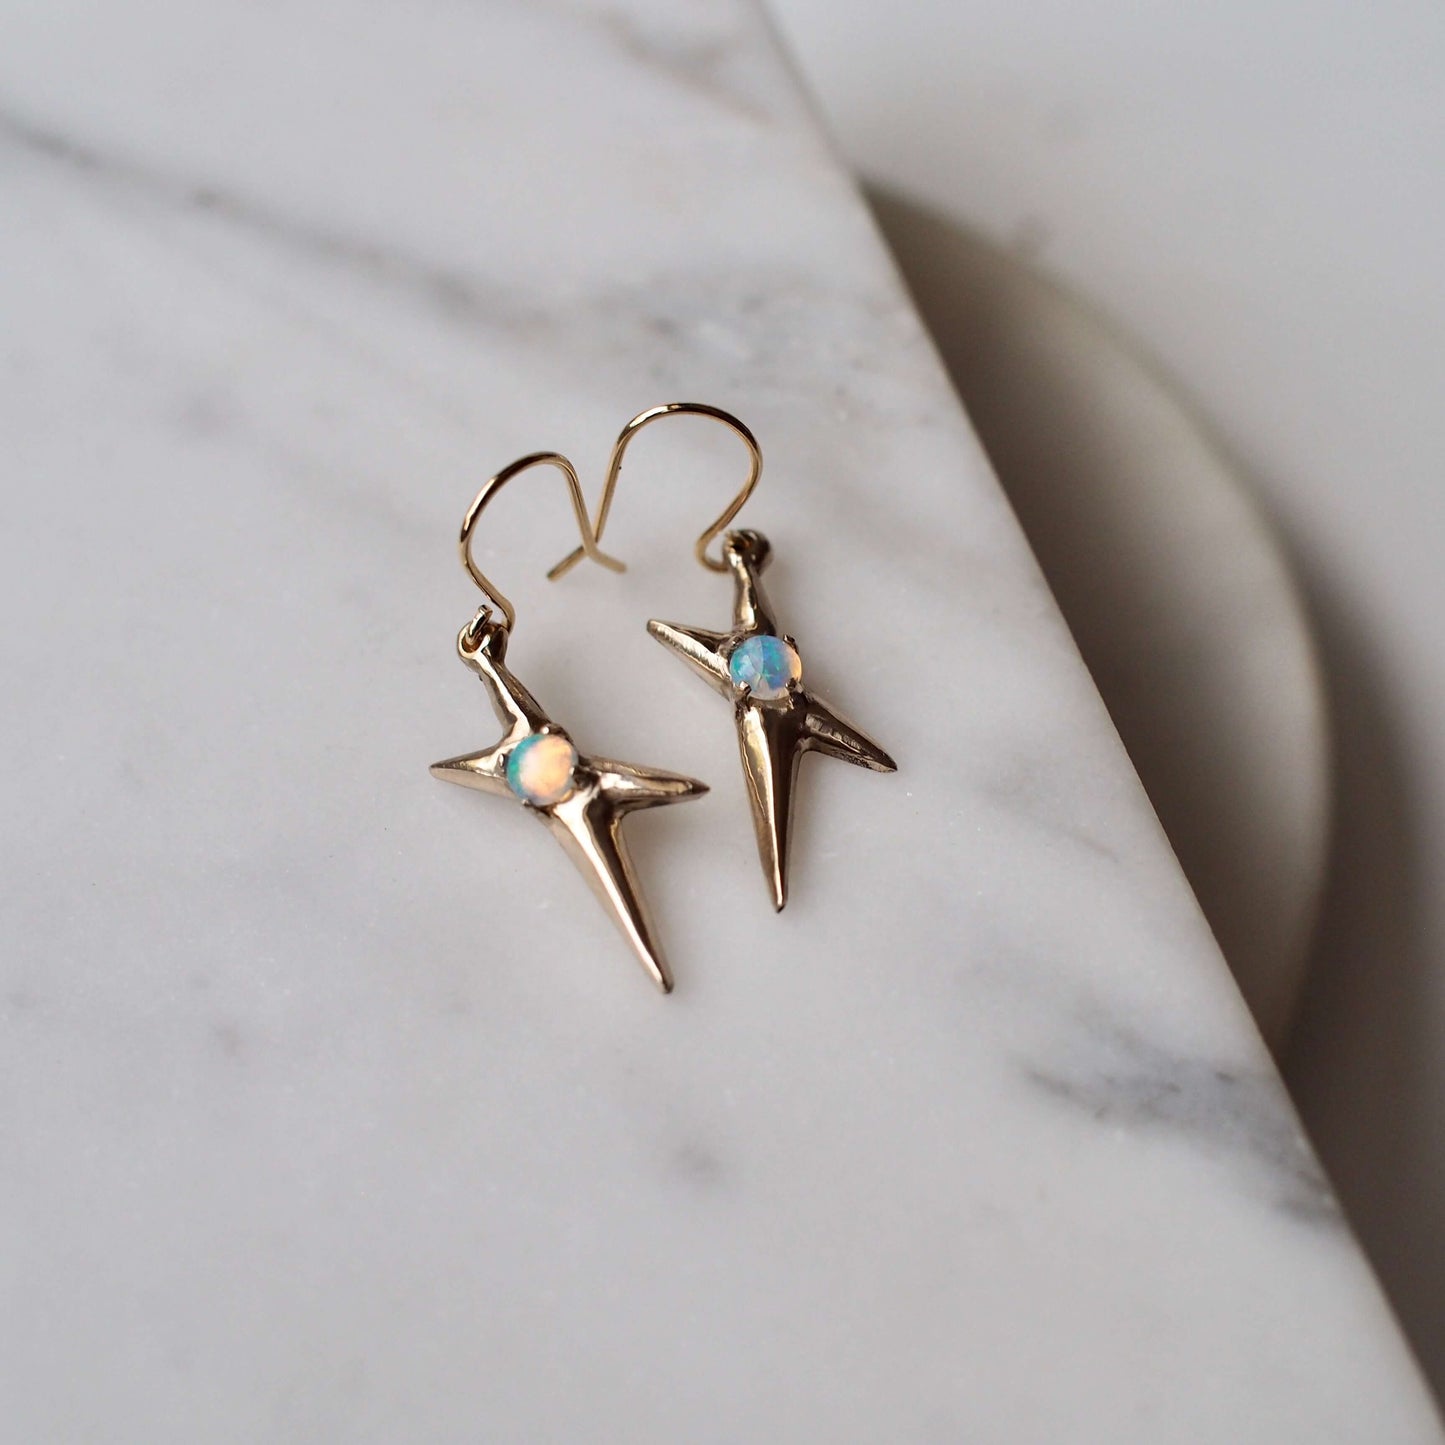 Spikey electricity earrings set with sustainably sourced opal in gold tone